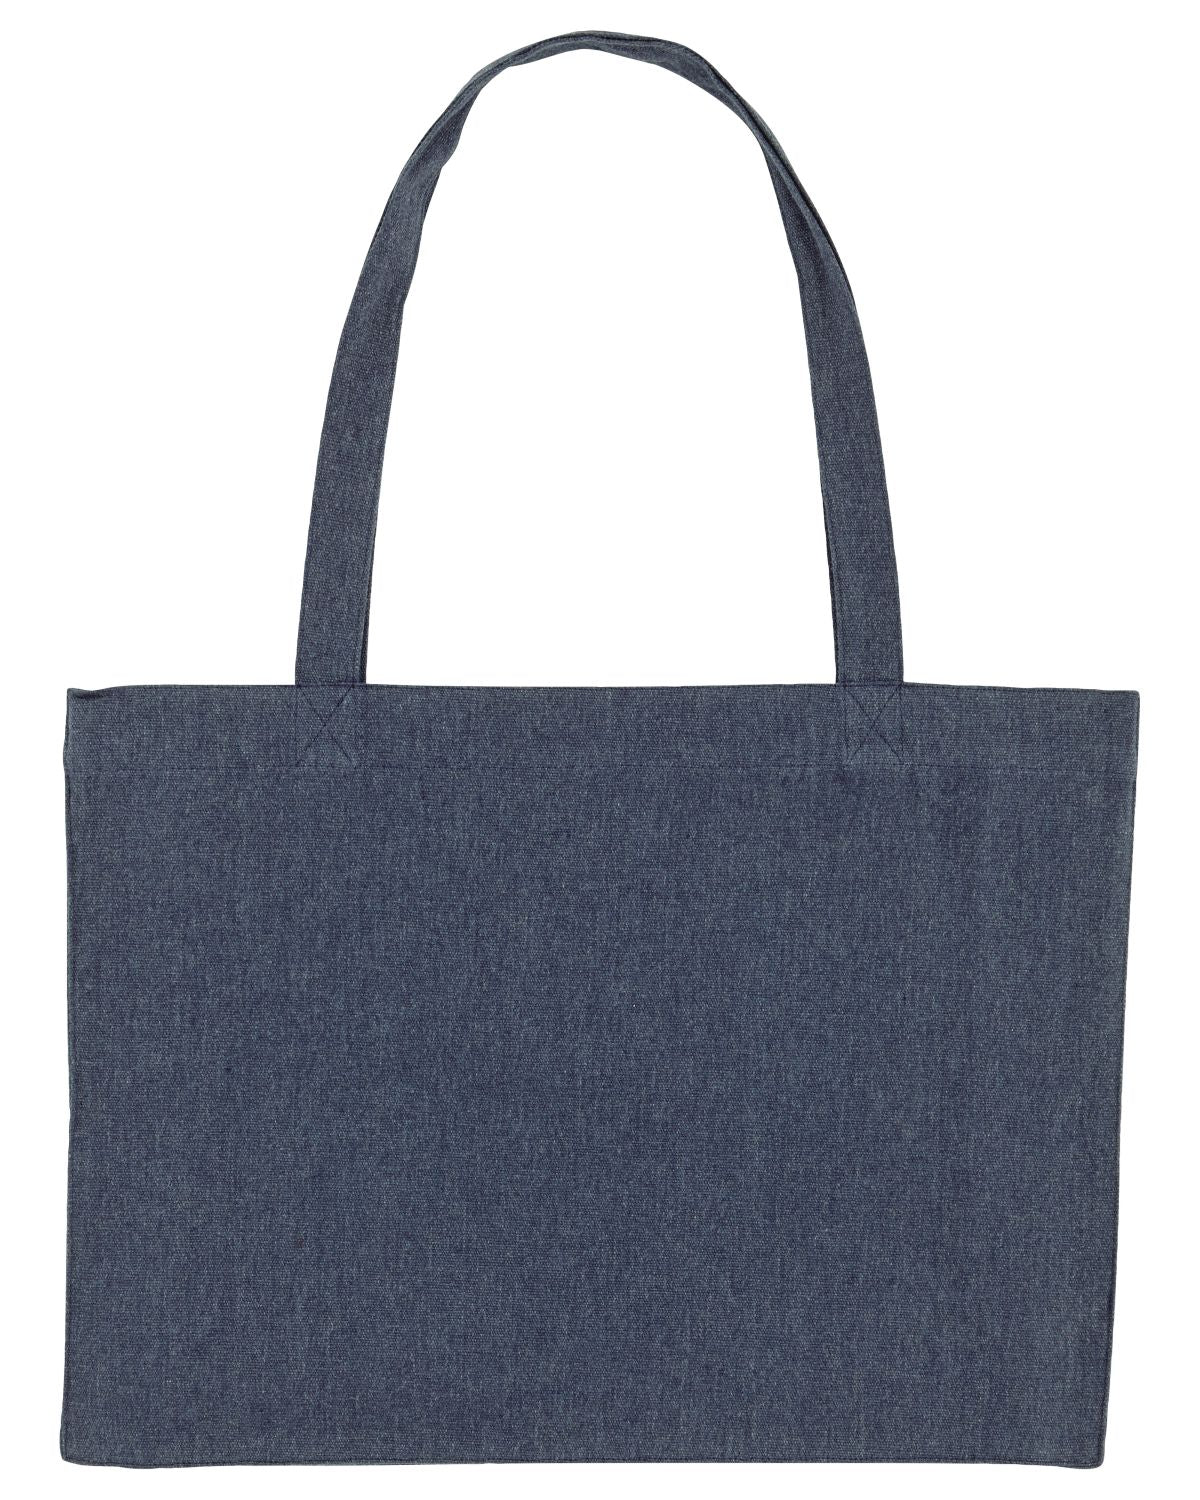 customize your own sustainable shopping bag made of 80% recycled organic cotton.